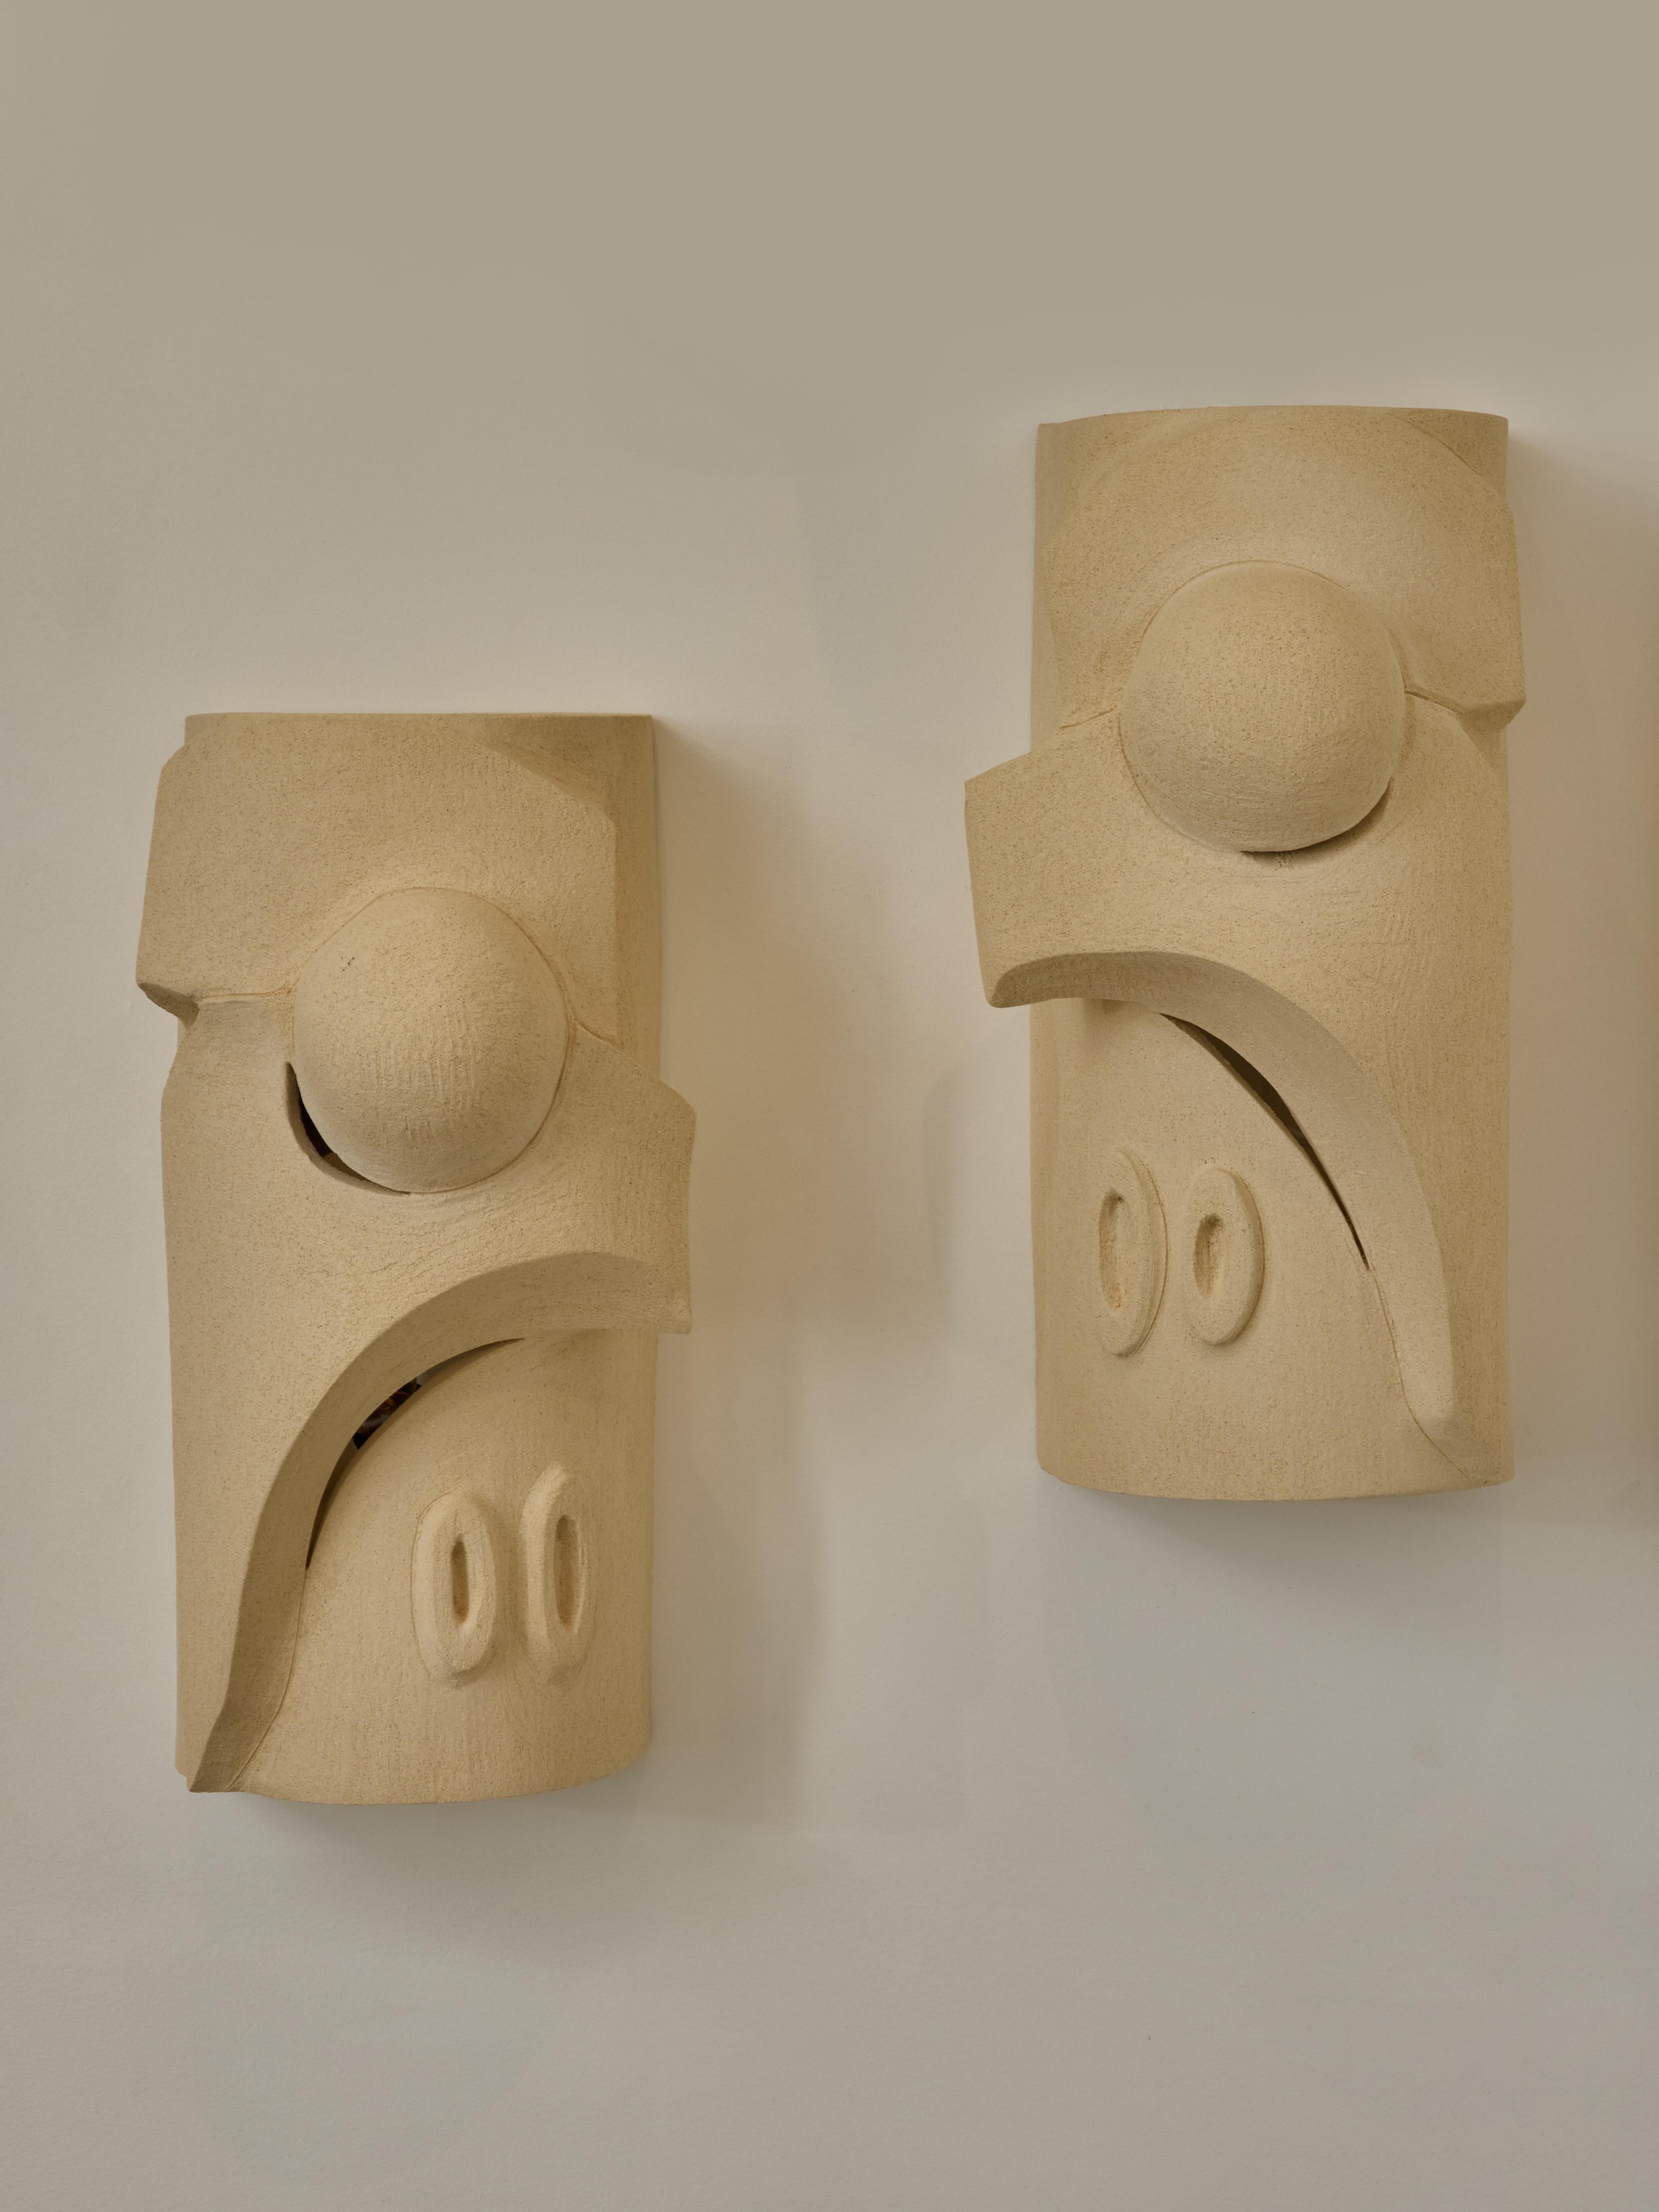 Pair of symmetrical ceramic wall sconces by Olivia Cognet, made in Vallauris, France.

Single piece of ceramic without electrical component, made to be installed n front of a source of light.

Since moving to Los Angeles in 2016, French artist and